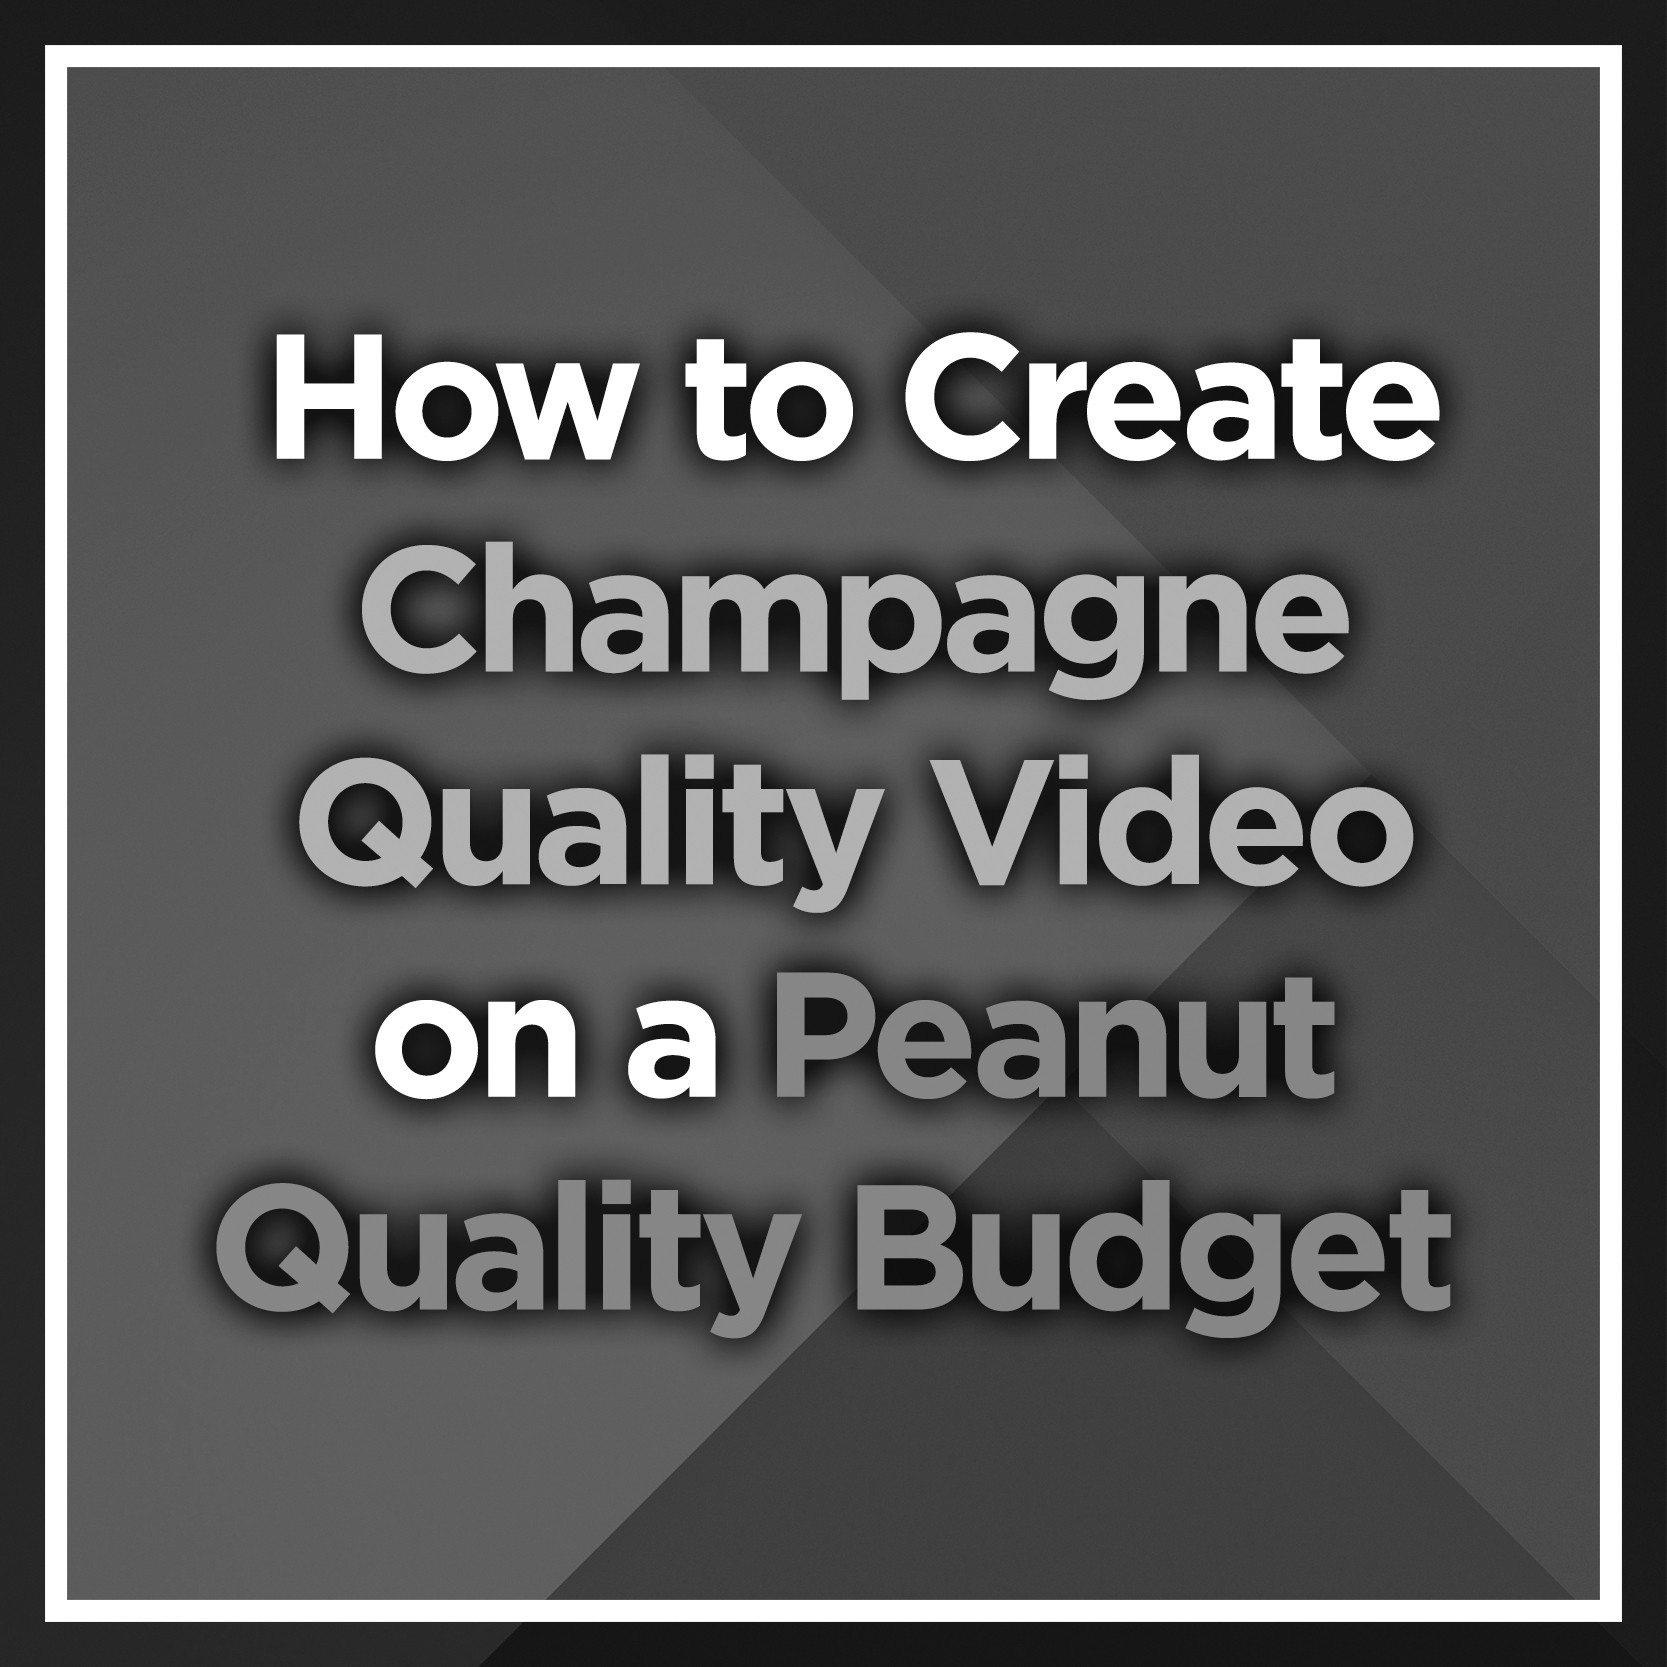 Champagne Quality Video